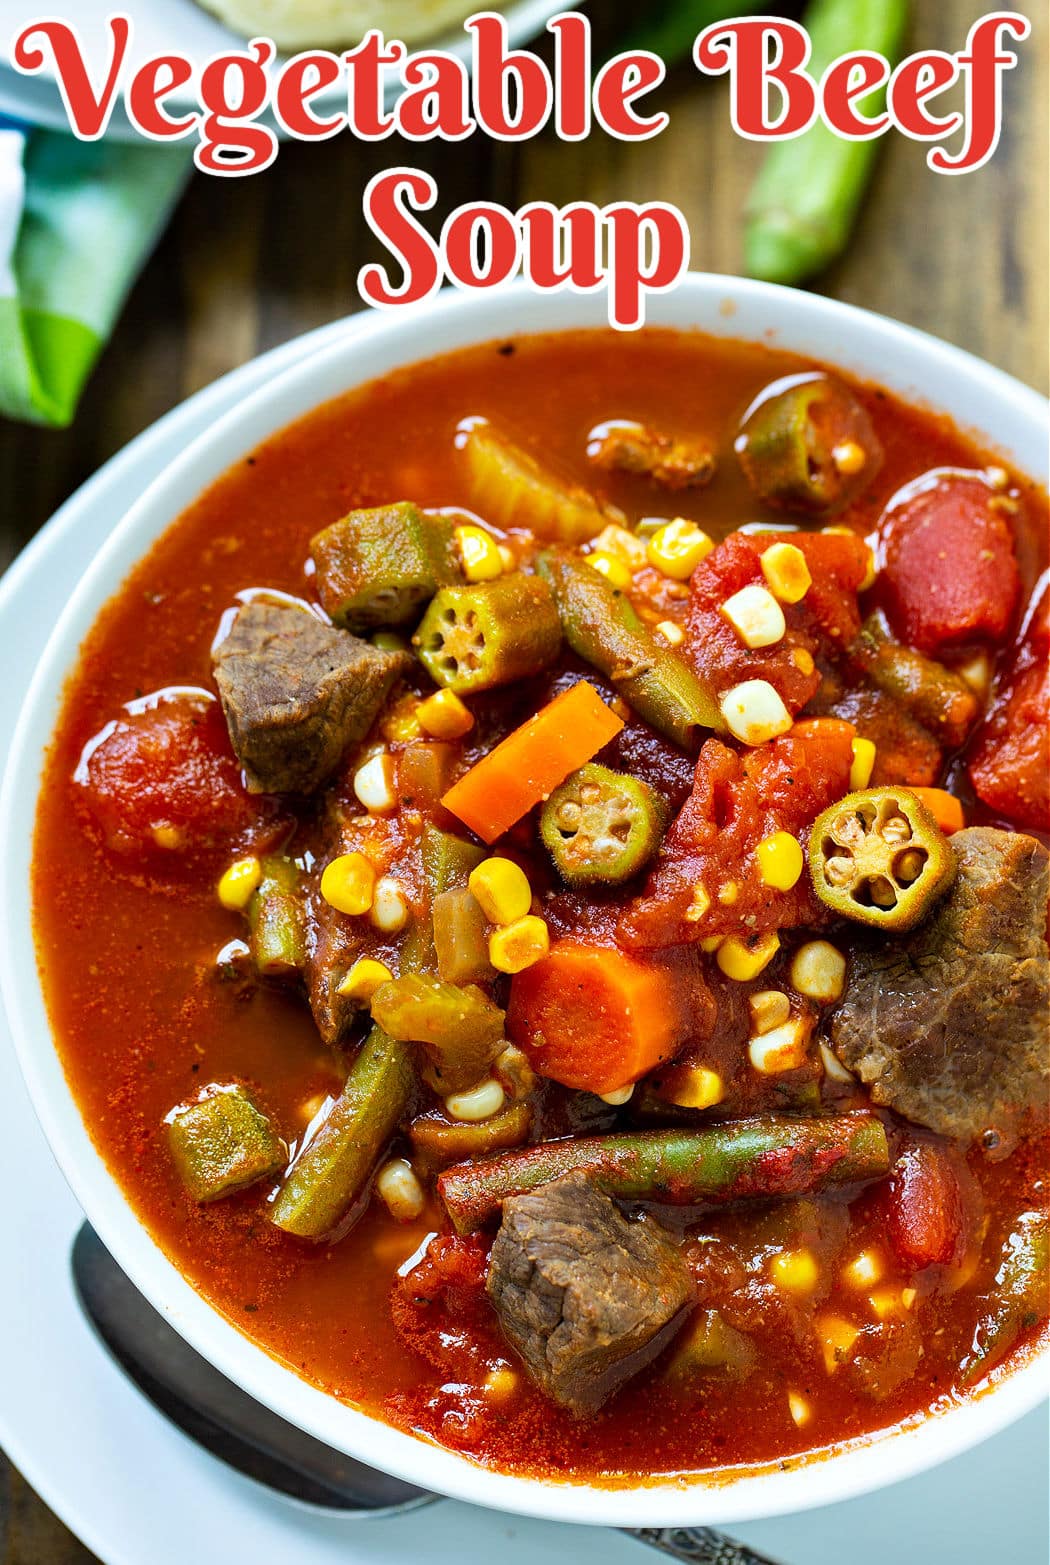 Vegetable Beef Soup in a bowl.